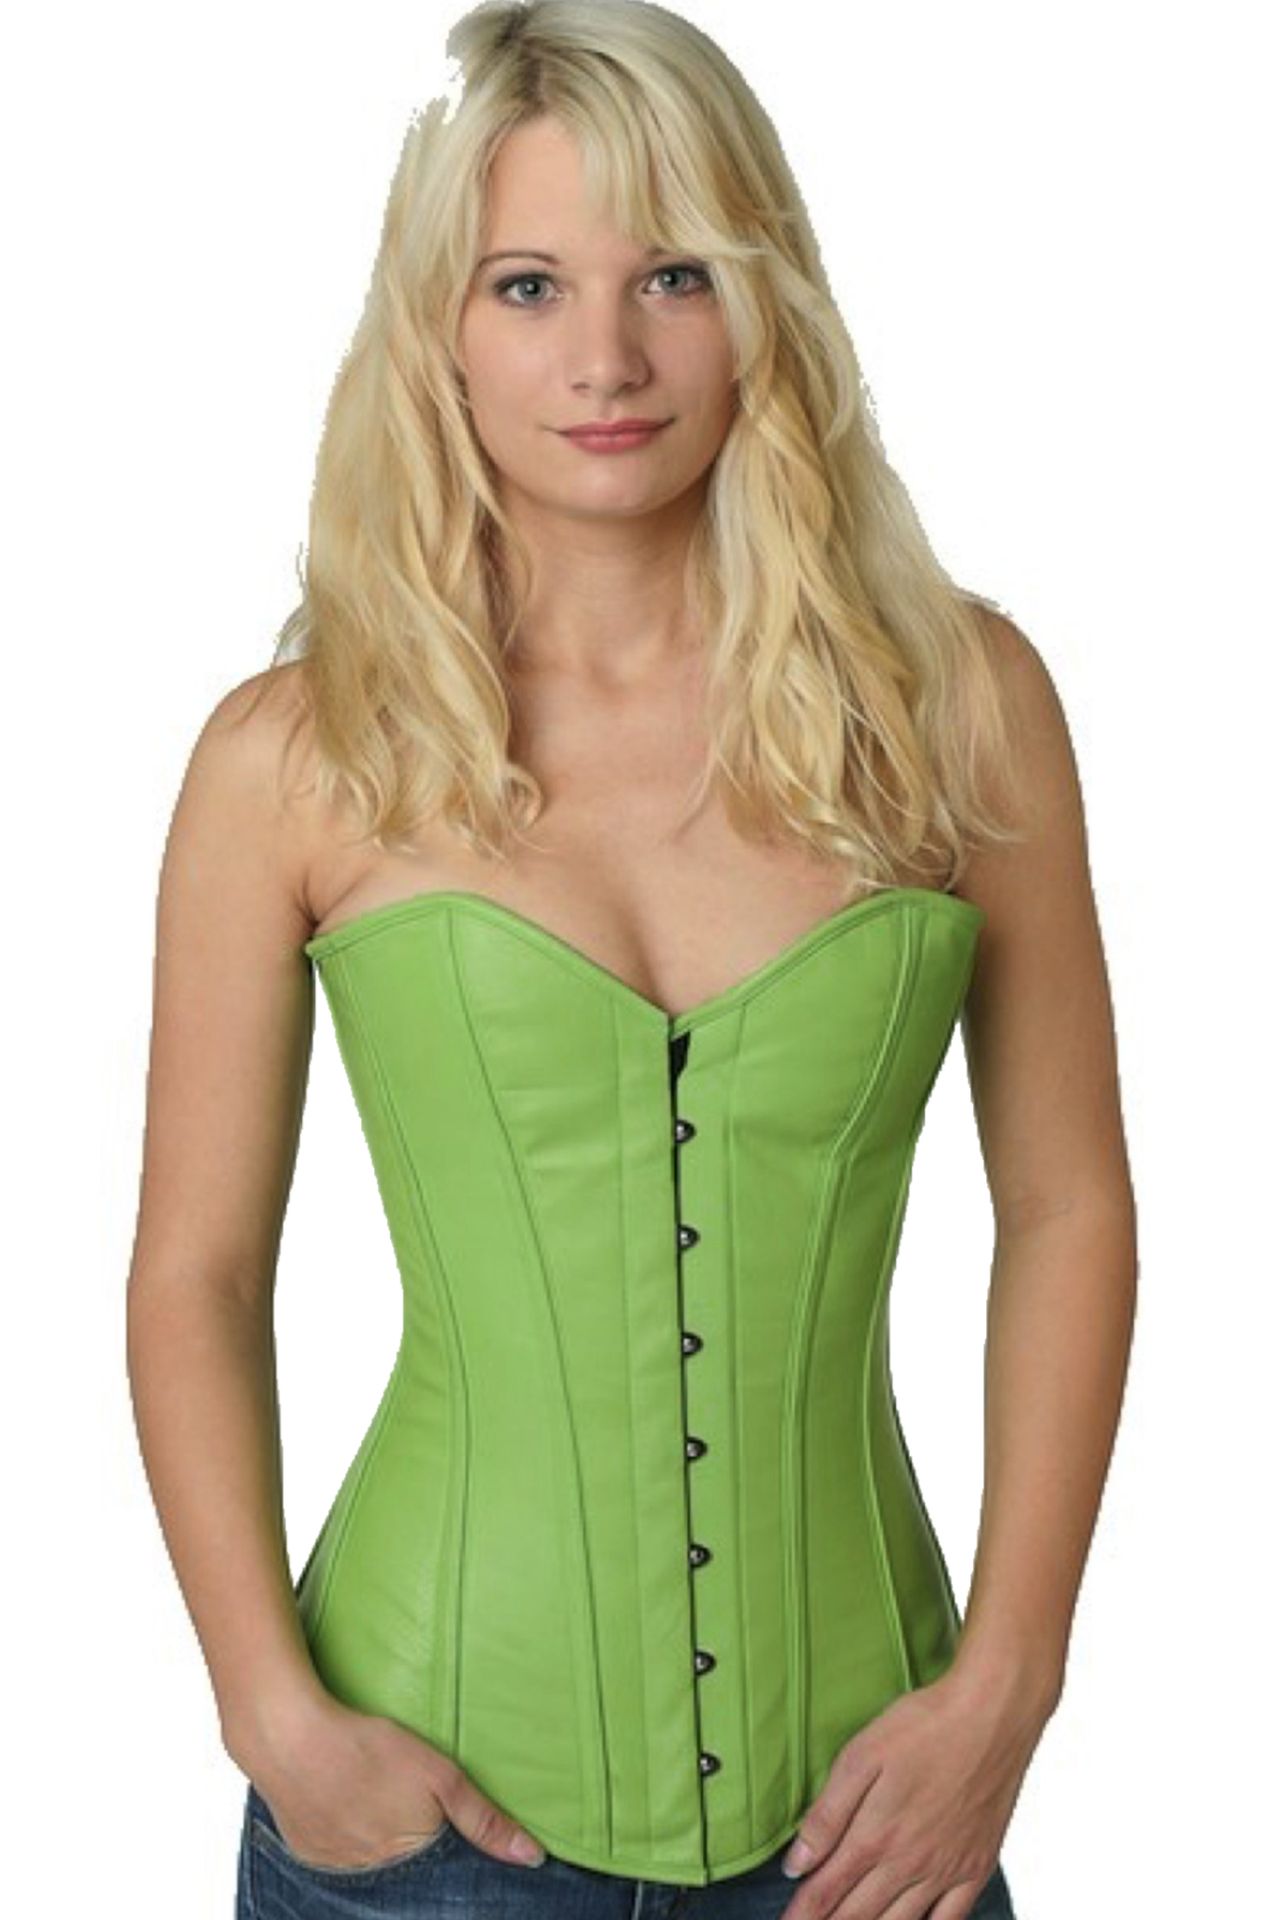 Corset green leather overbust ly28